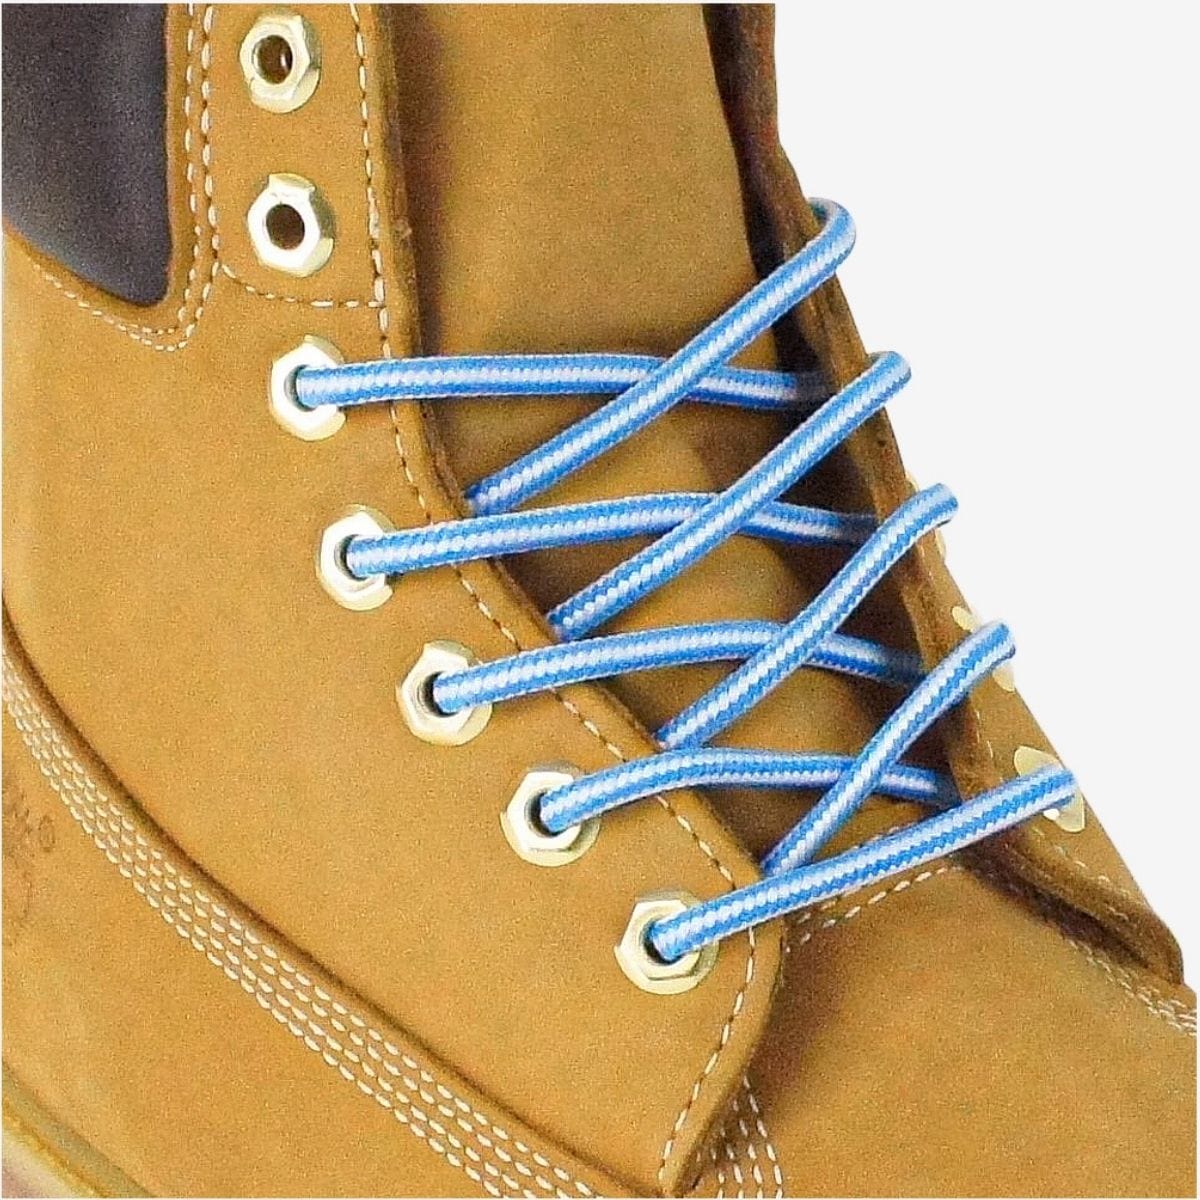 shop-round-shoelaces-online-in-blue-and-white-for-boots-sneakers-and-running-shoes